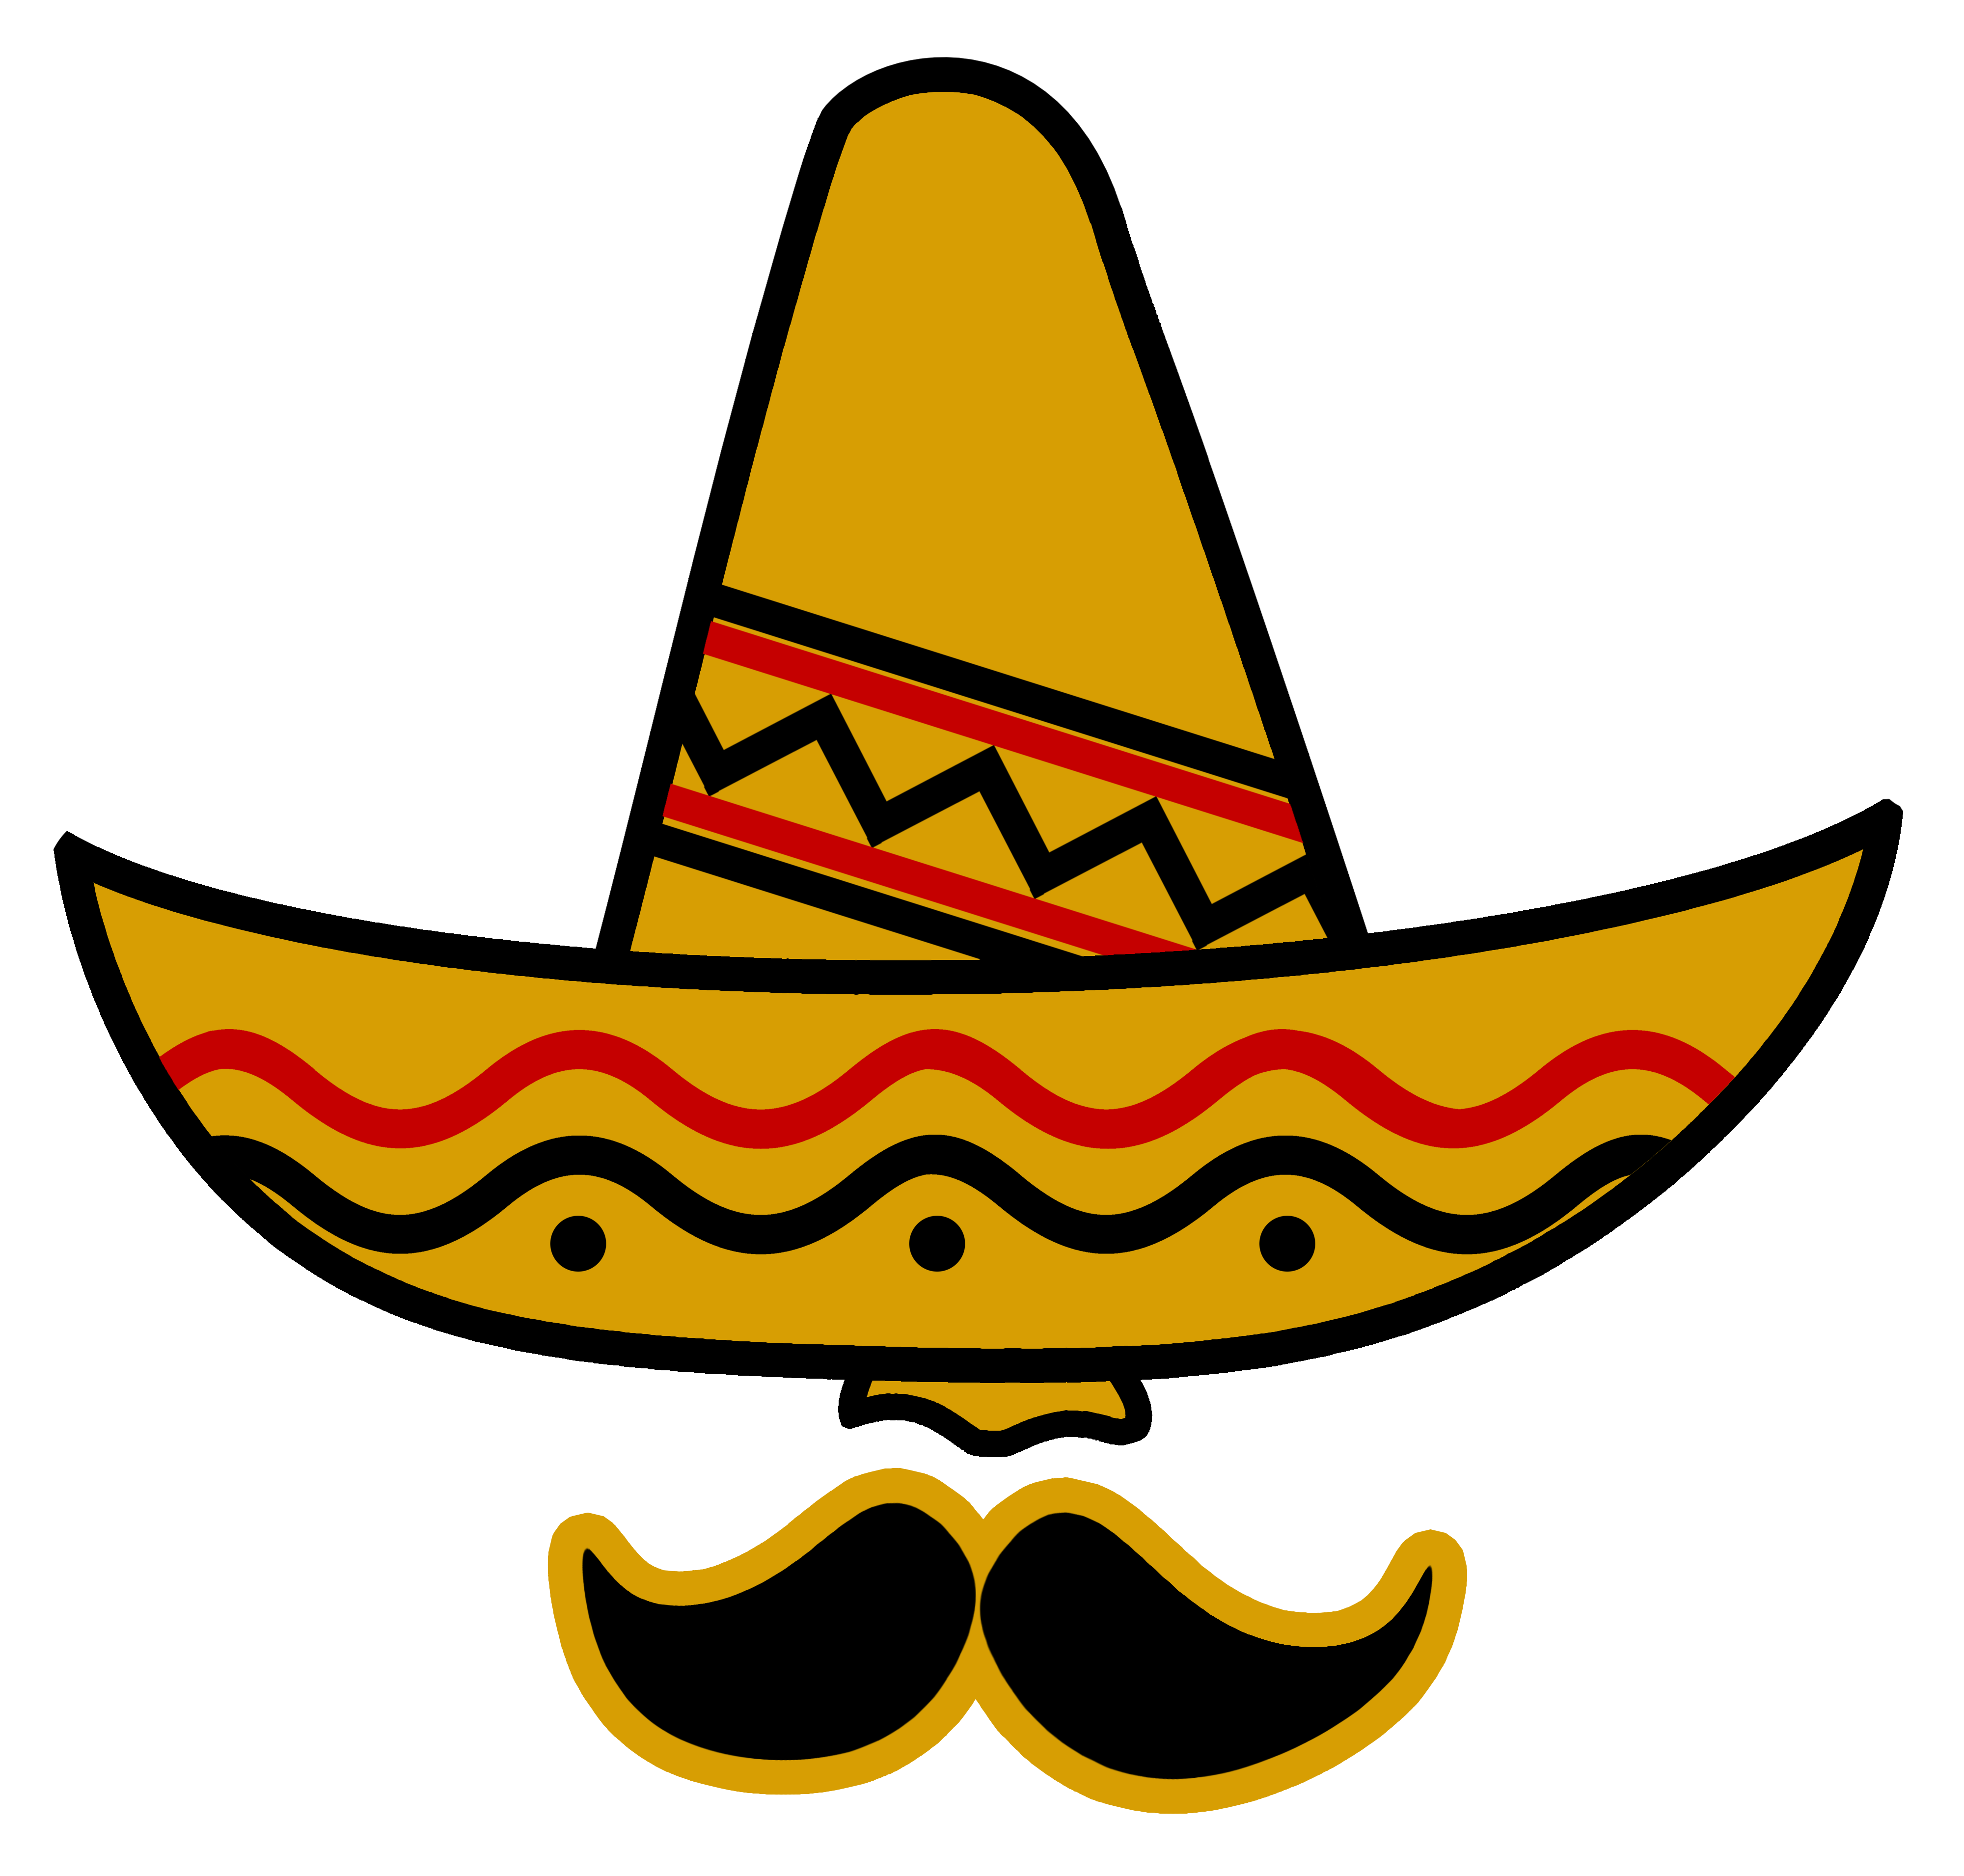 Sombrero hat mexico bart drawing free image download